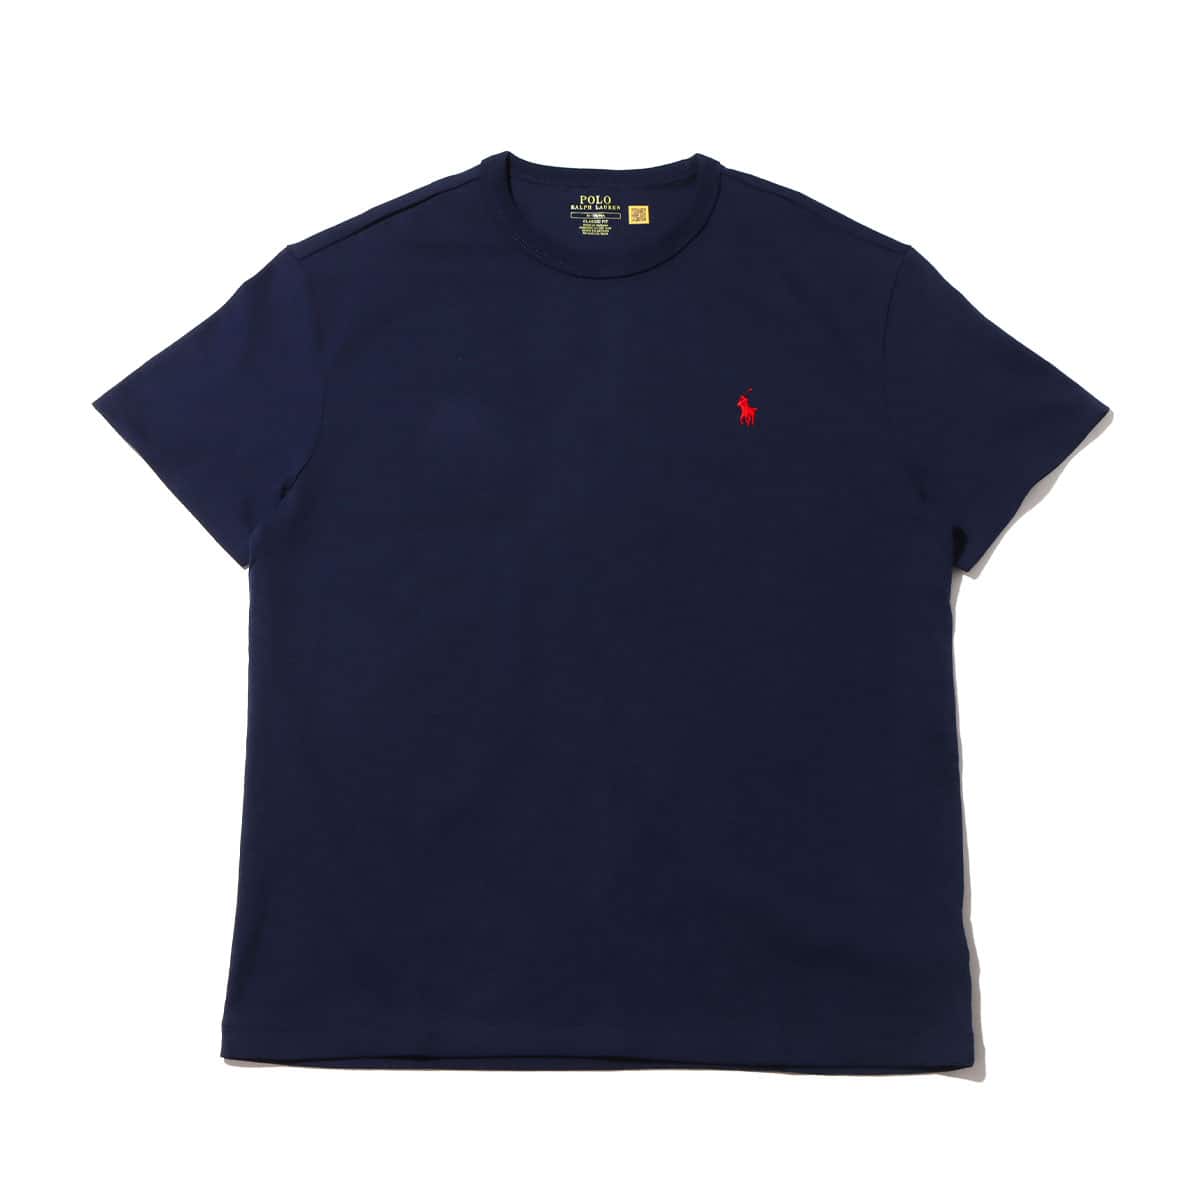 POLO RALPH LAUREN CLASSIC FIT HEAVY WEIGHT T-SHIRT NEWPORT NAVY/C3870 22SS-I_photo_large